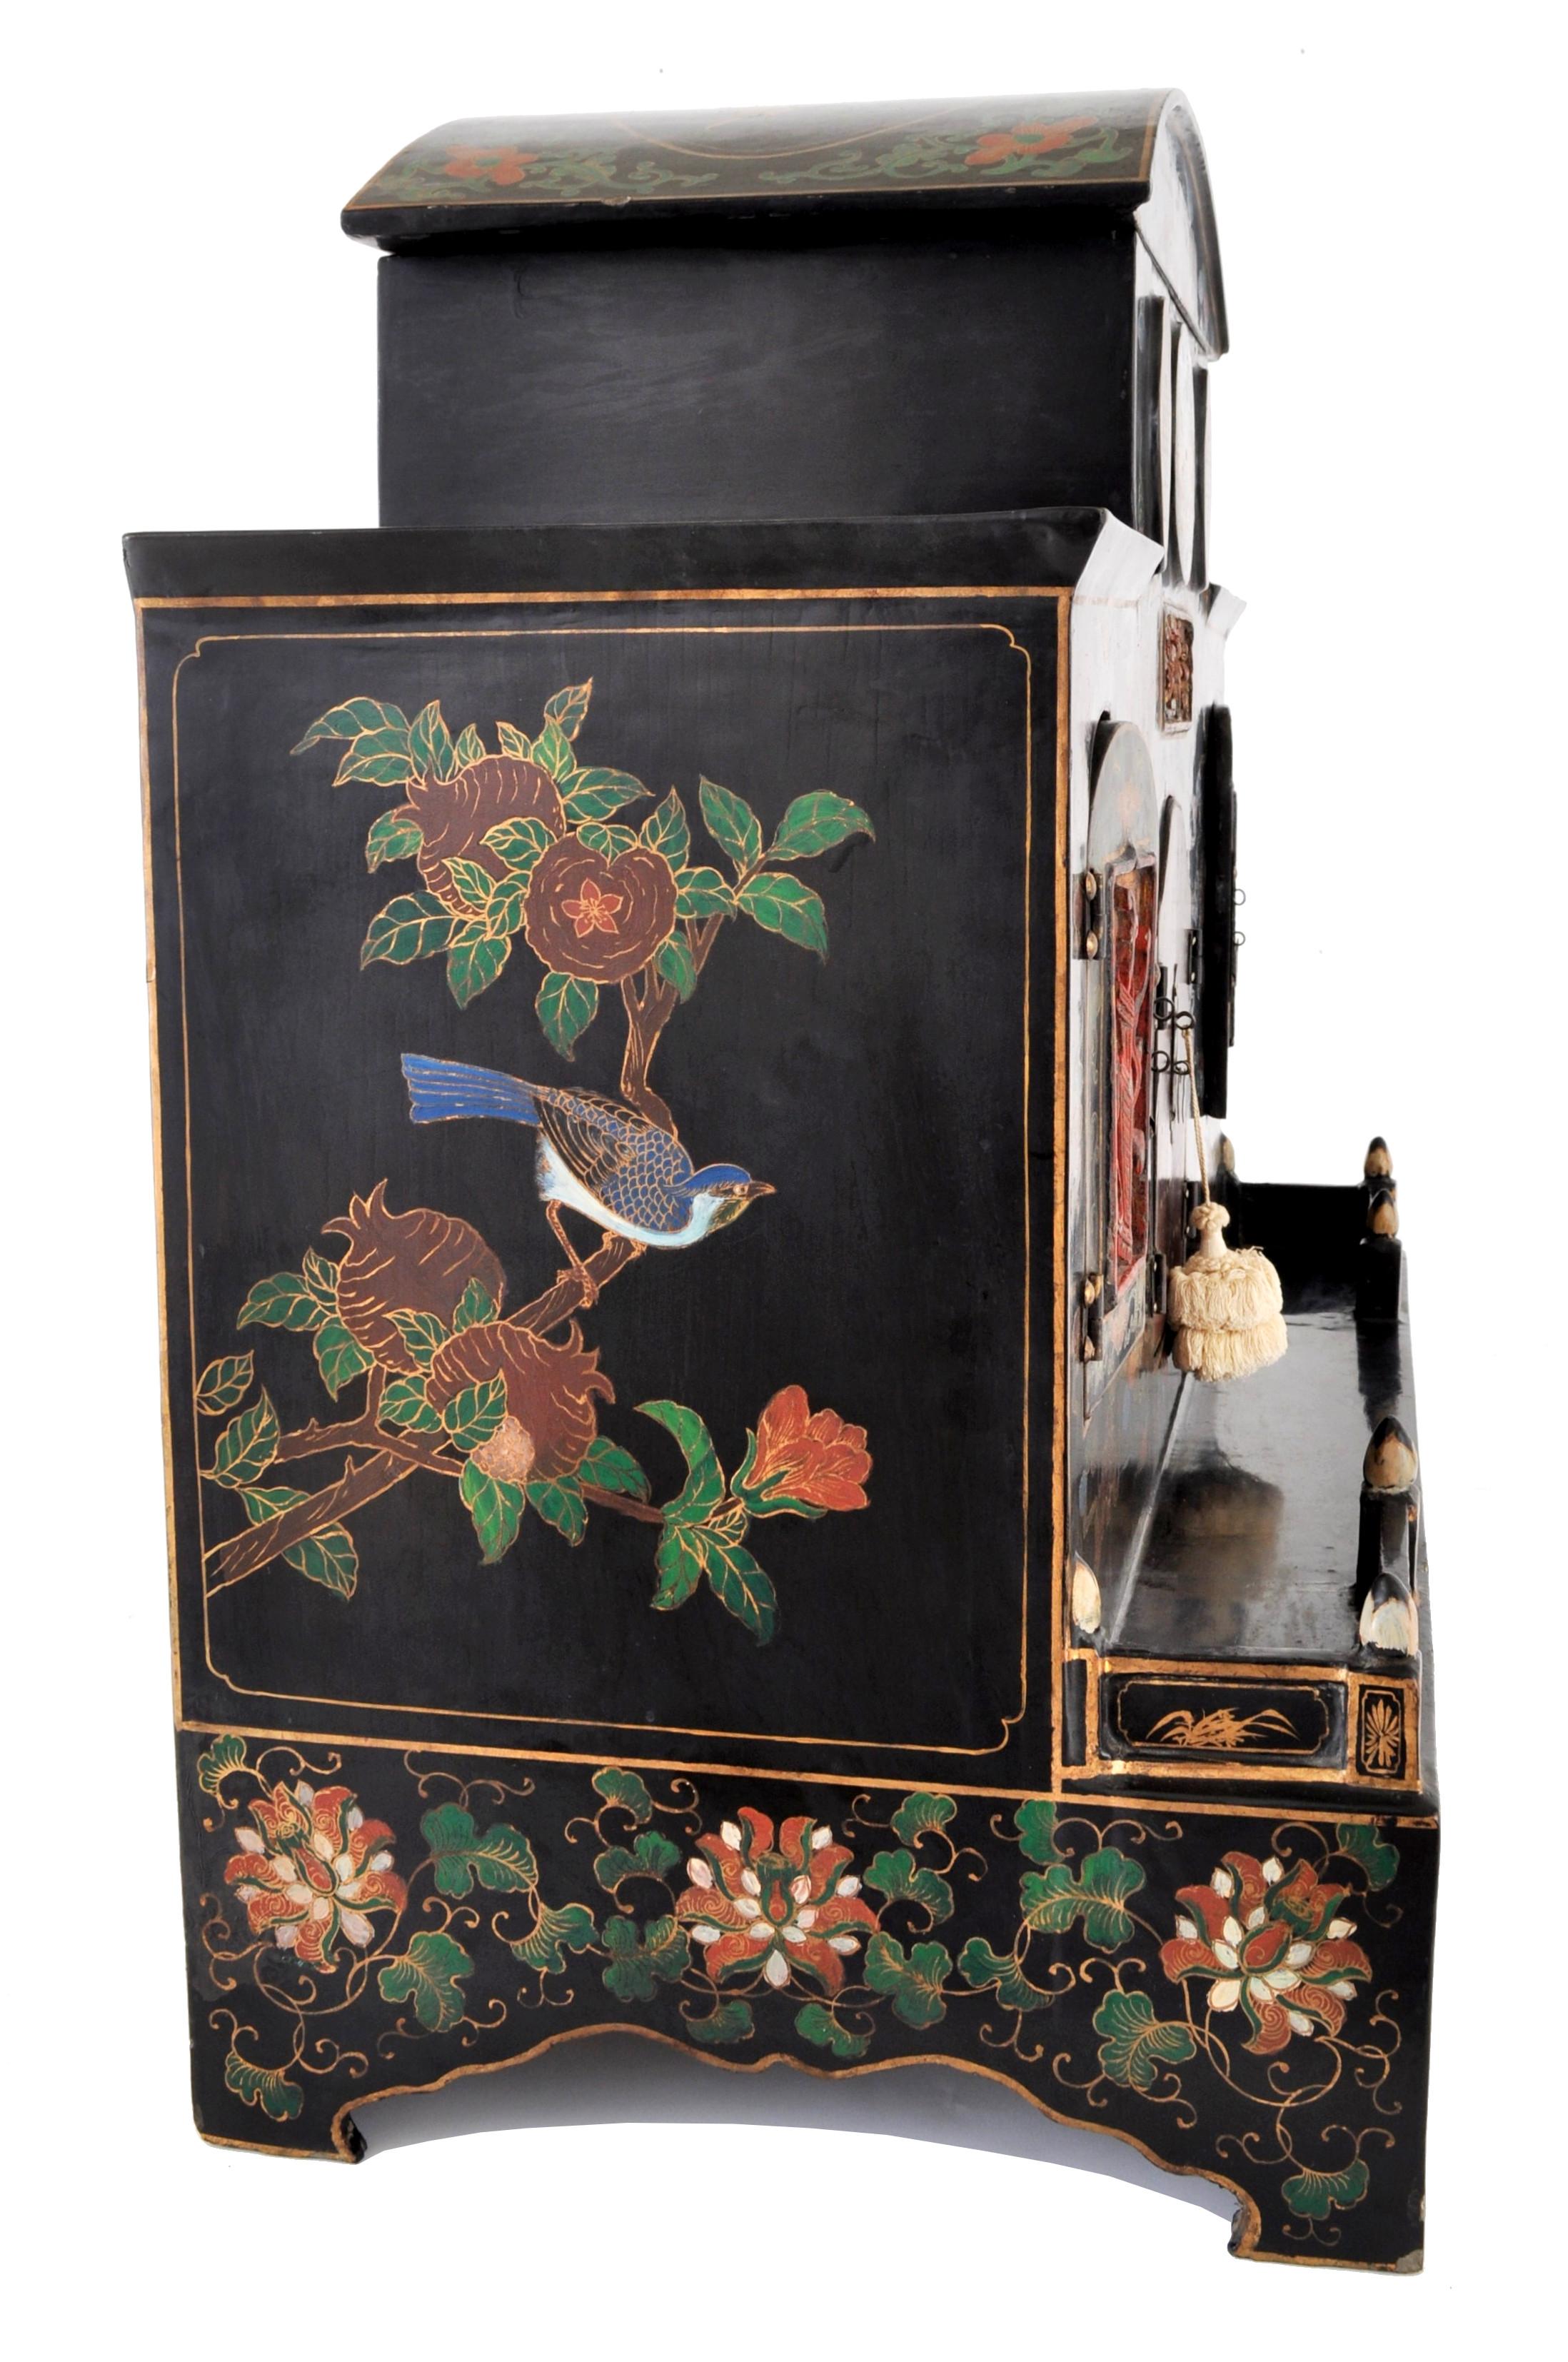 Antique Chinese Qing dynasty Buddhistic shrine/cabinet, circa 1900. The shrine having a domed removable top with a storage reservoir below, the cabinet is lavishly decorated and hand painted with cranes, clouds, bats, and other symbols of good